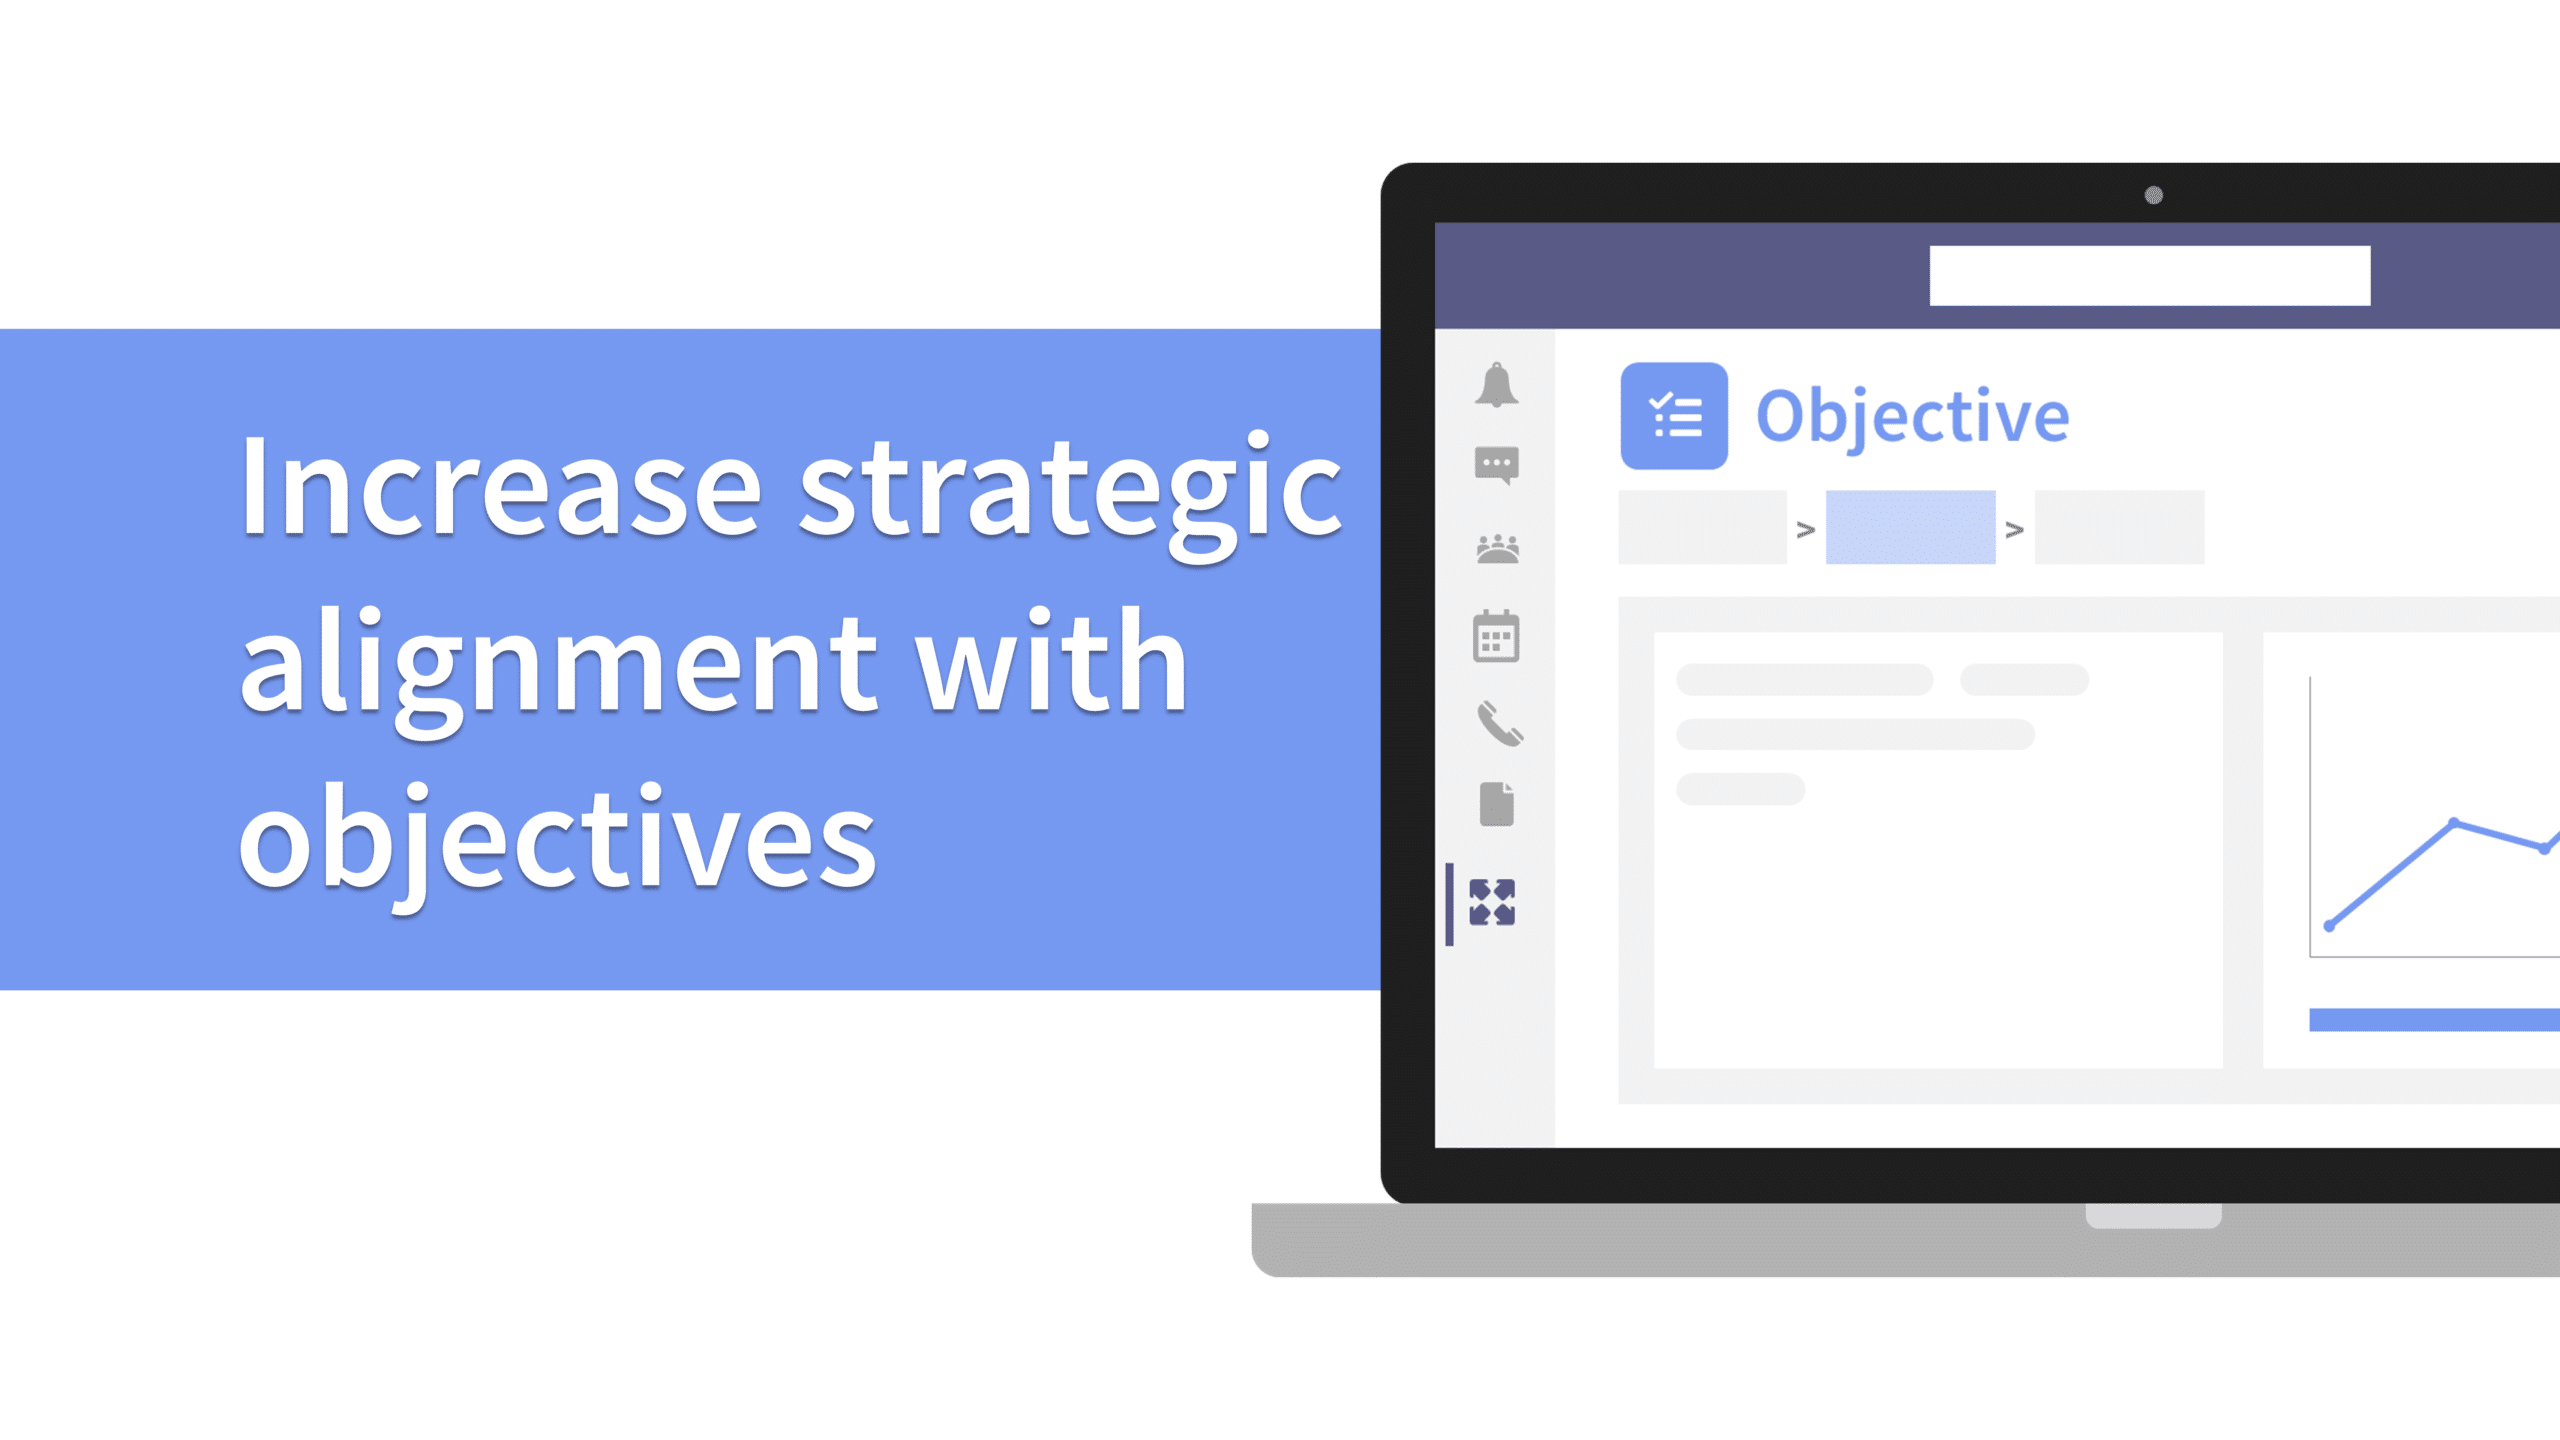 Increase strategic alignment with objectives